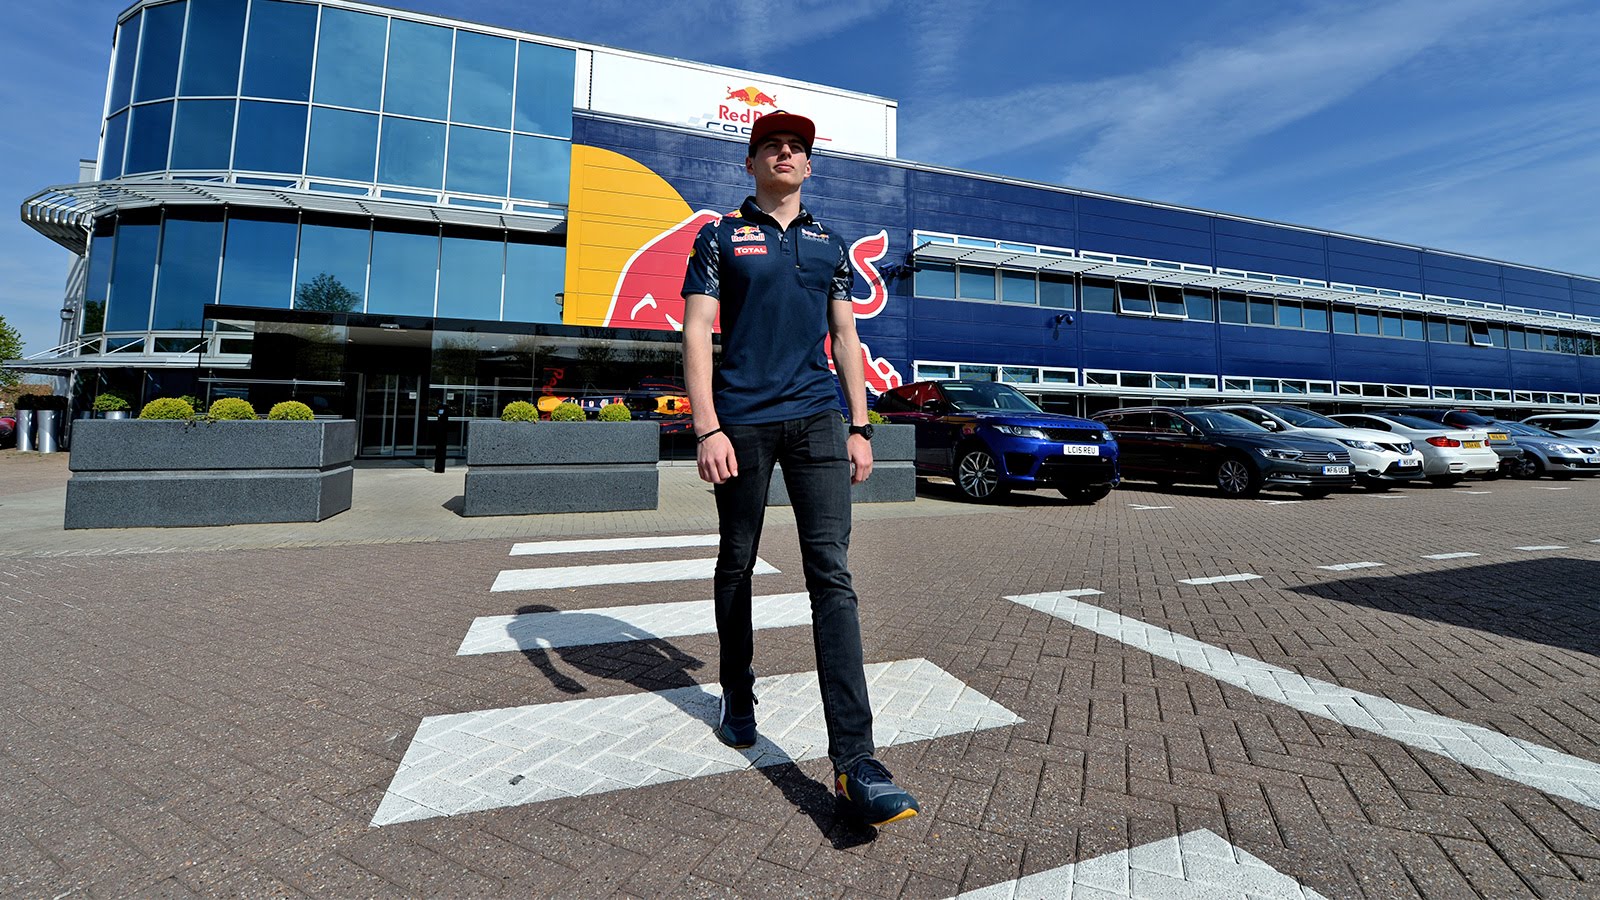 Video: Tour the Red Bull factory with Max Verstappen